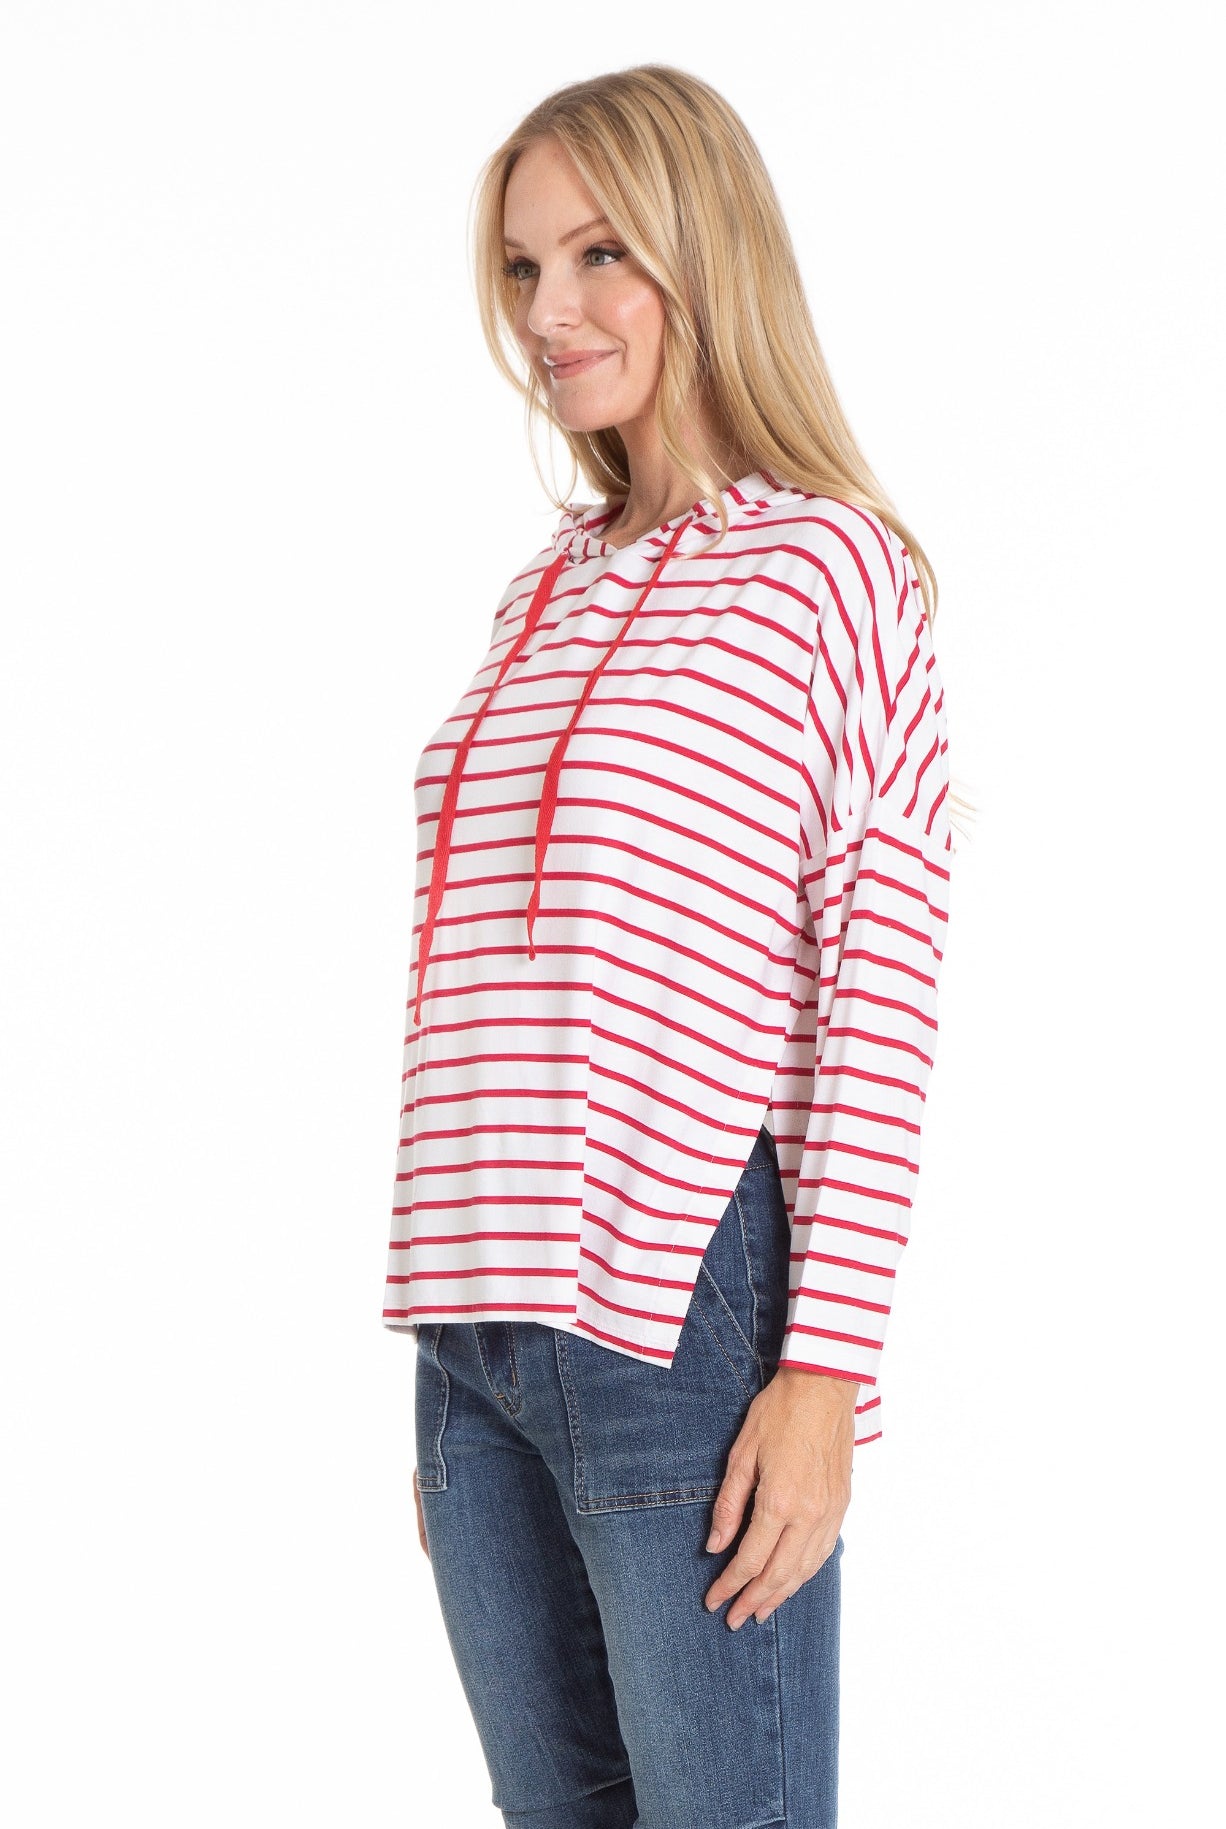 Hoodie With Side Slits RED/White Stripe Side APNY